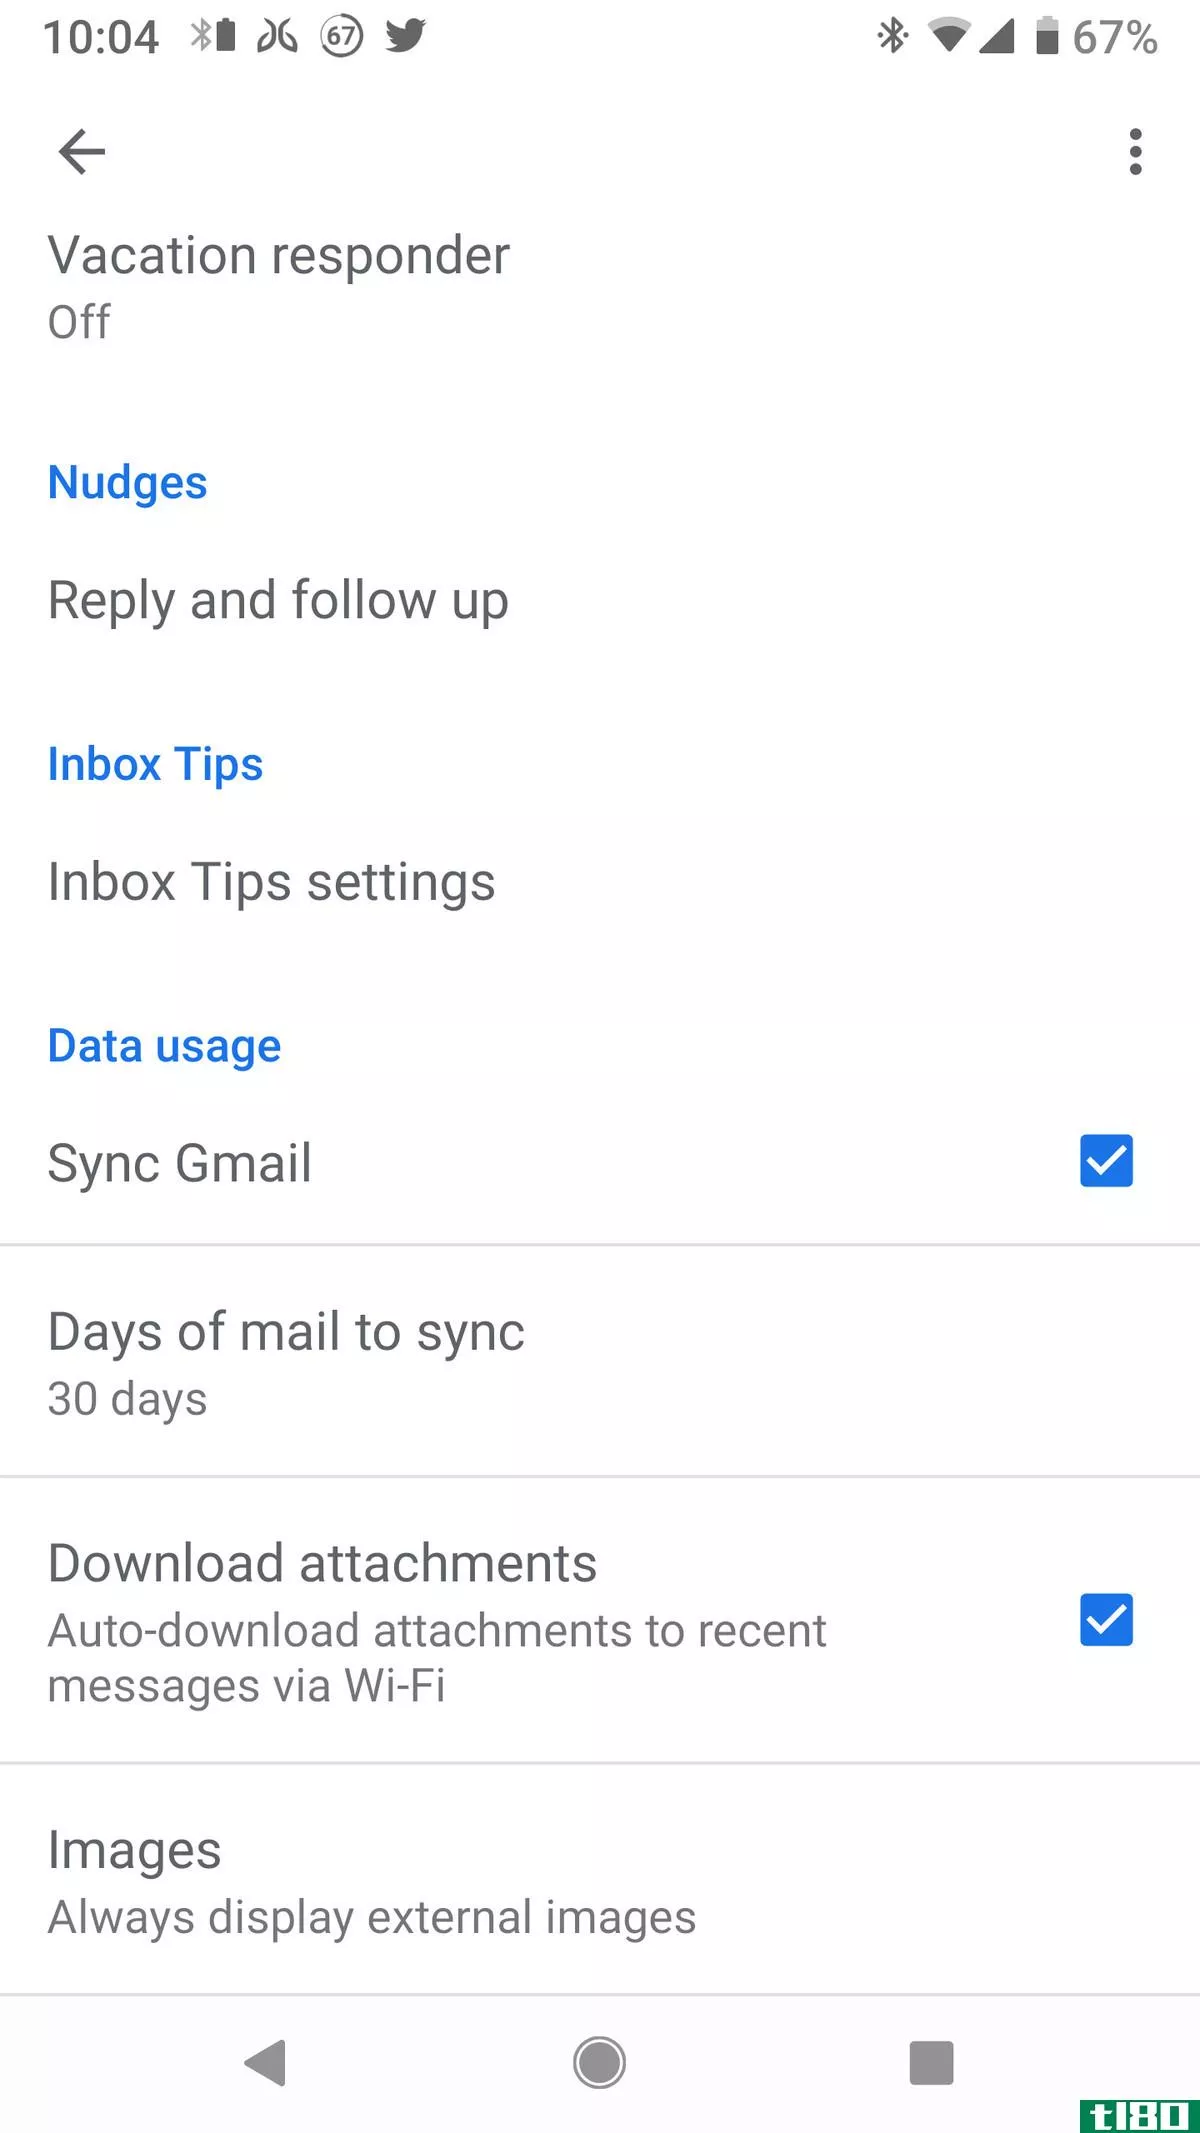 Disable image autoloading in Android Gmail: 